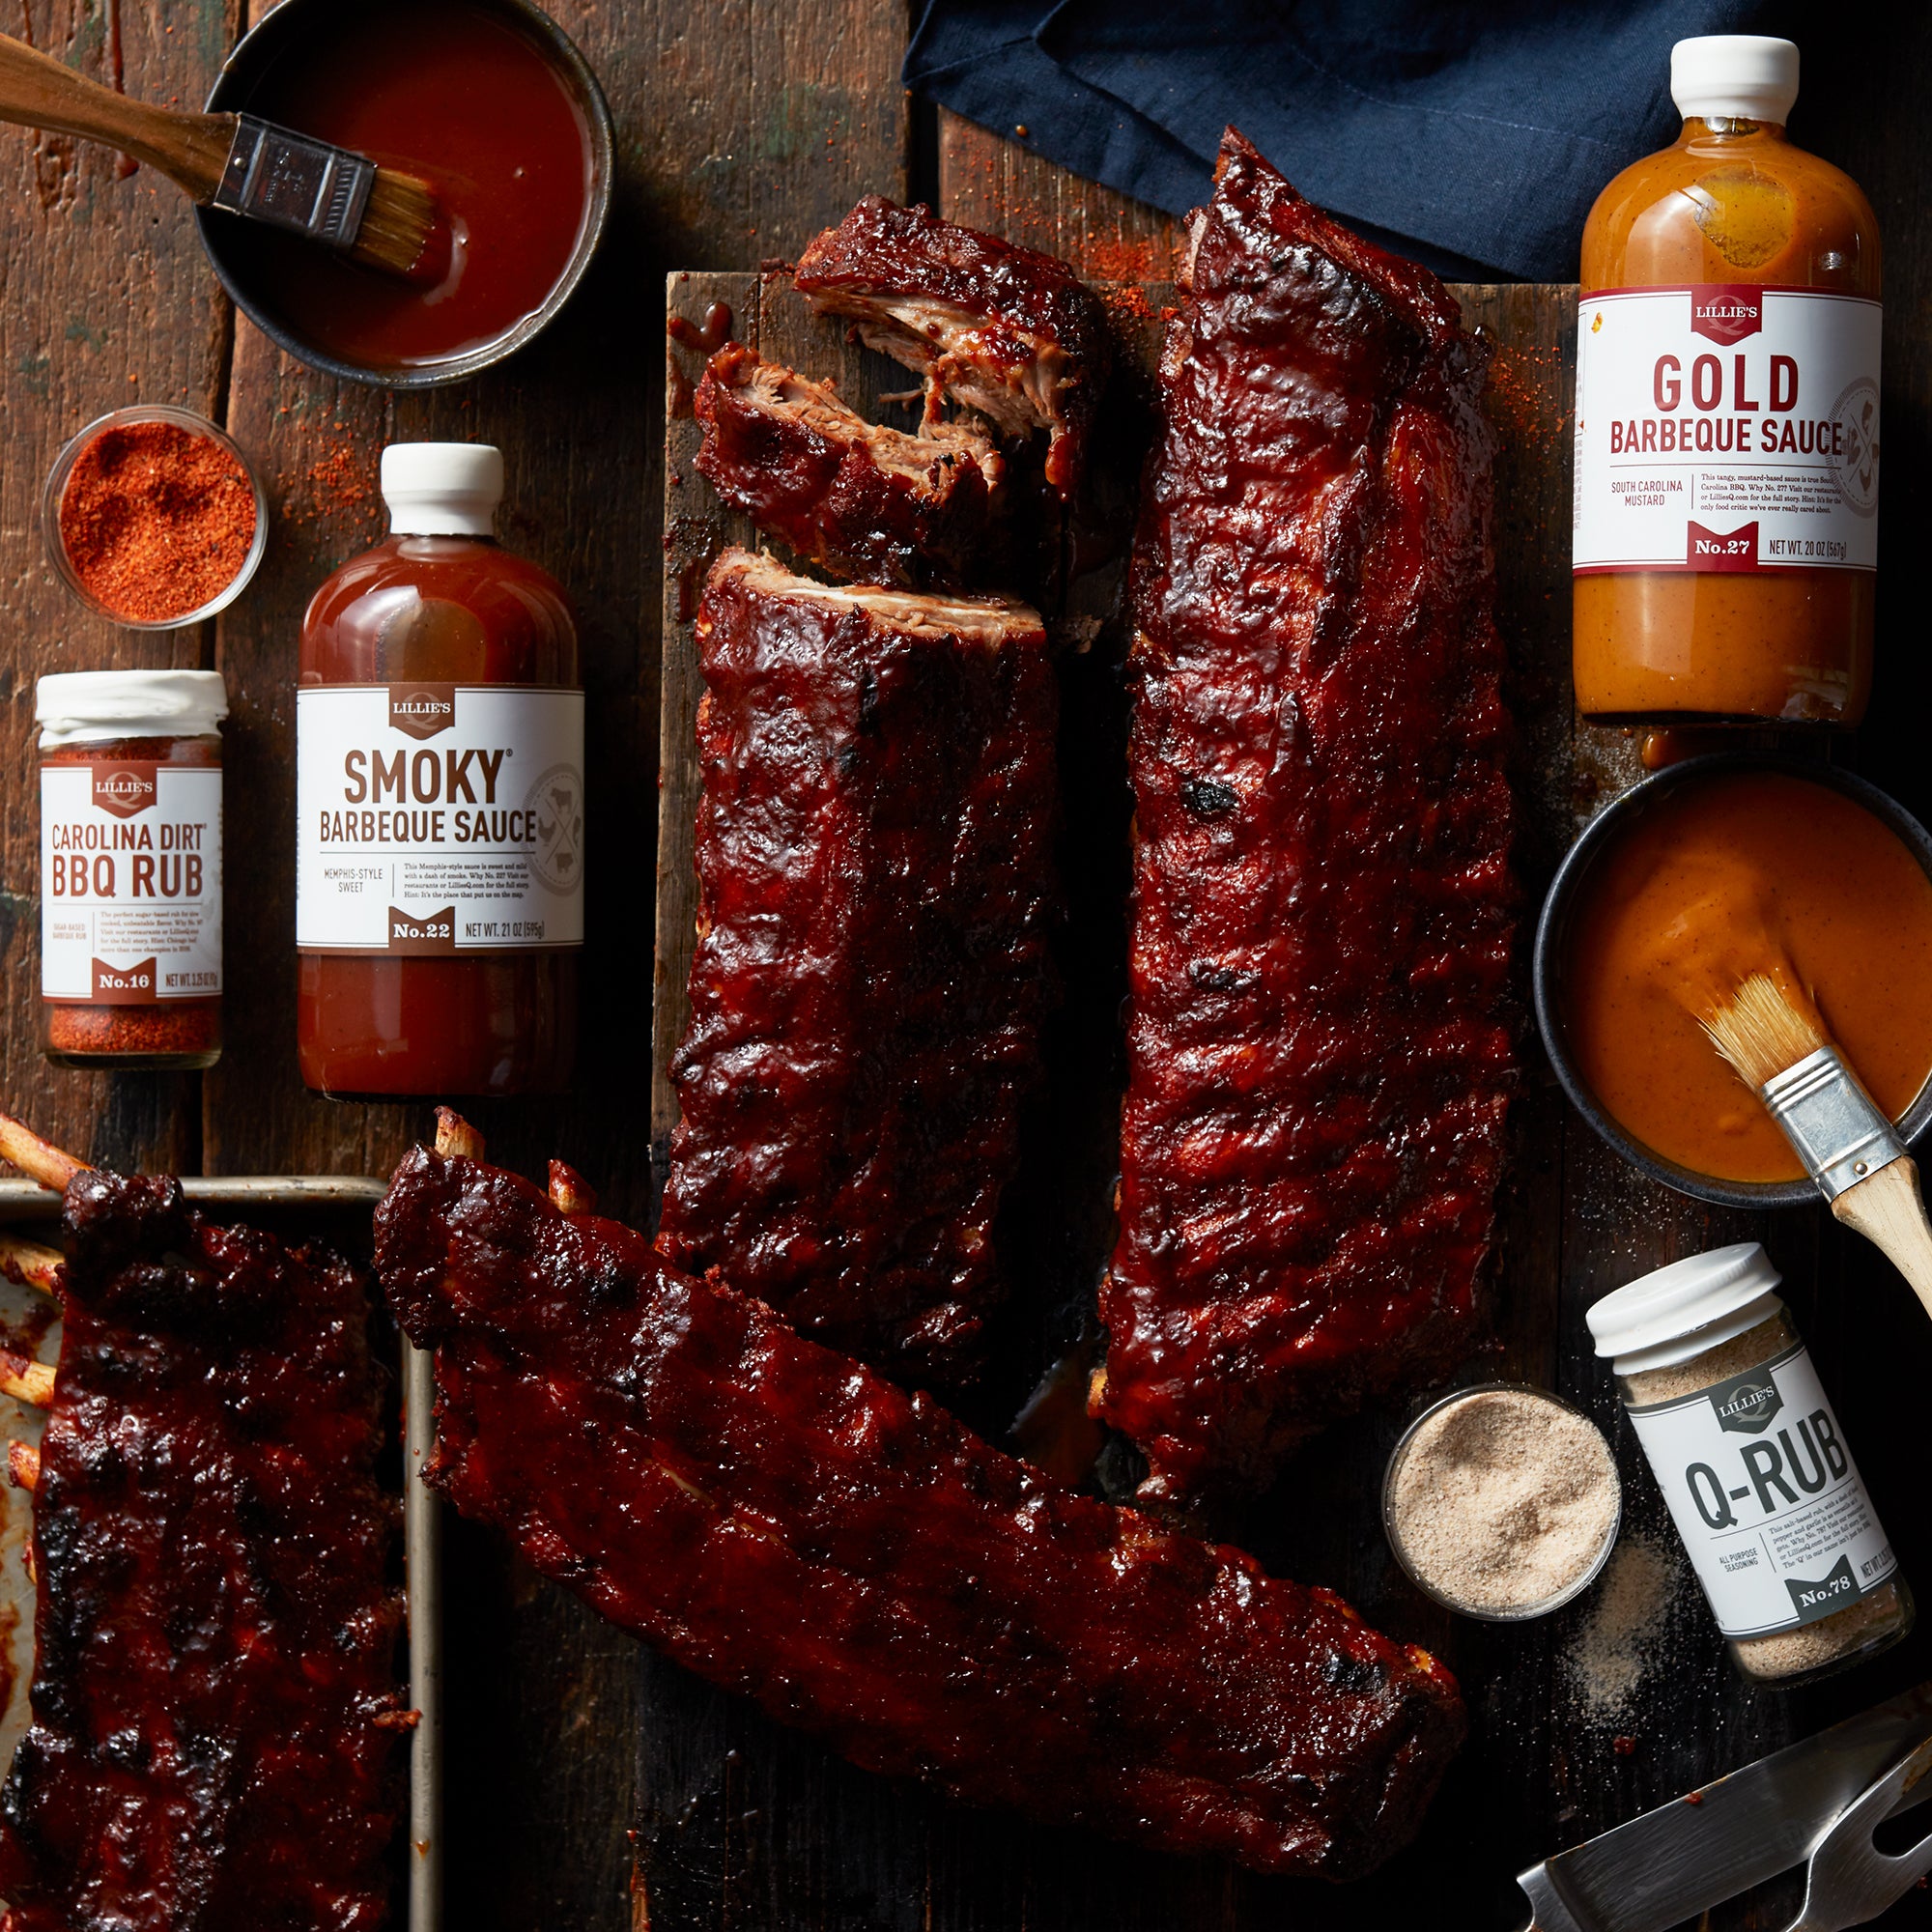 10 Grilling Gifts To Give Your Dad This Father’s Day